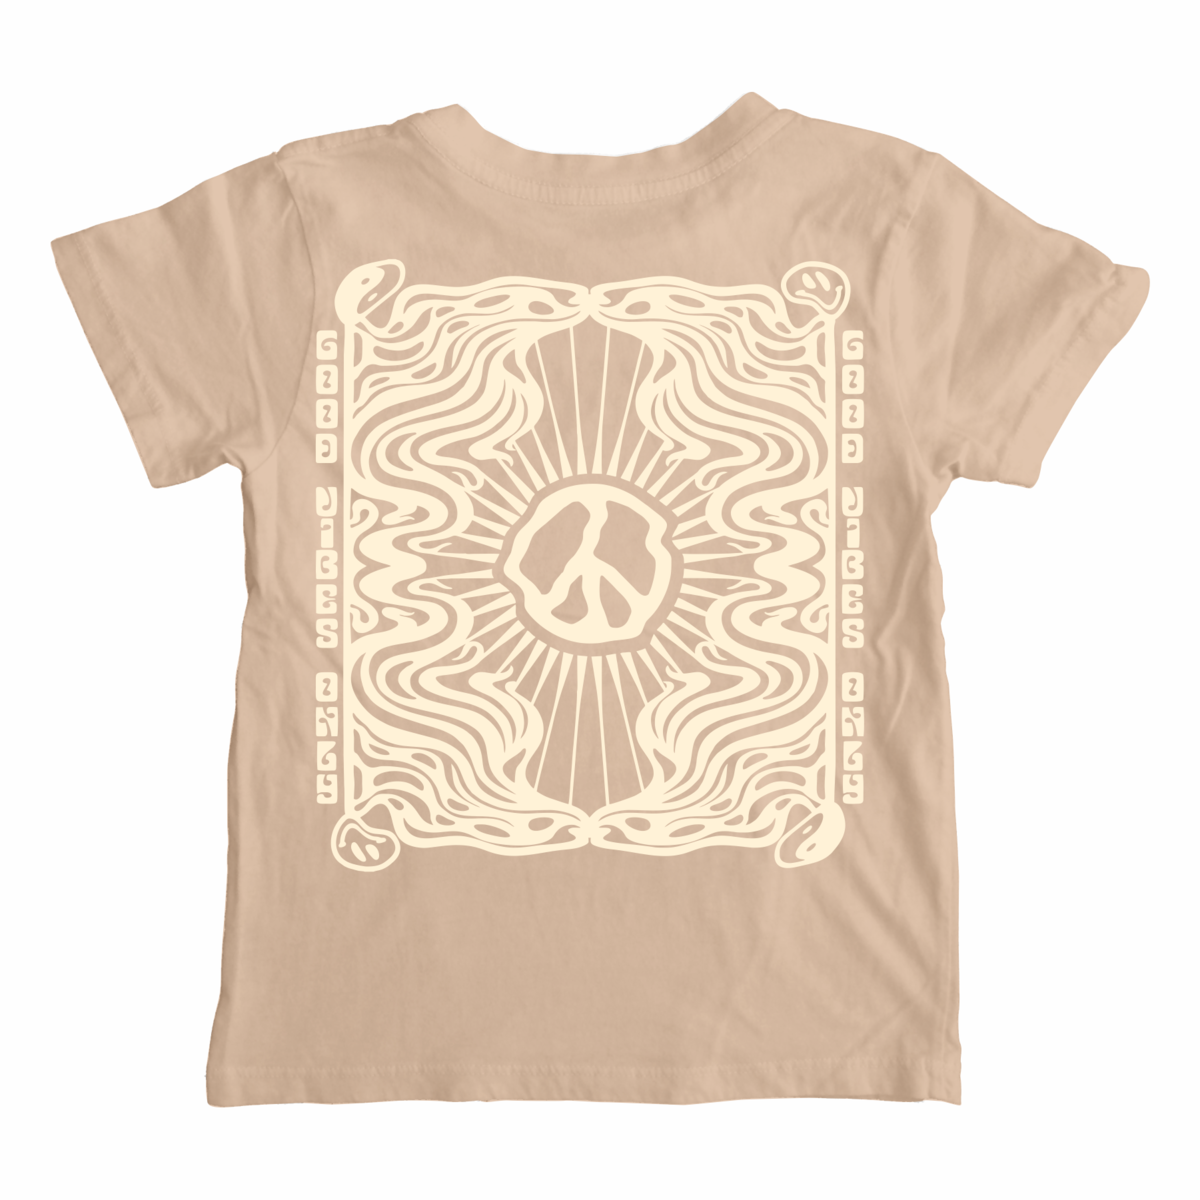 Good Vibes Only Graphic Tee - Sand